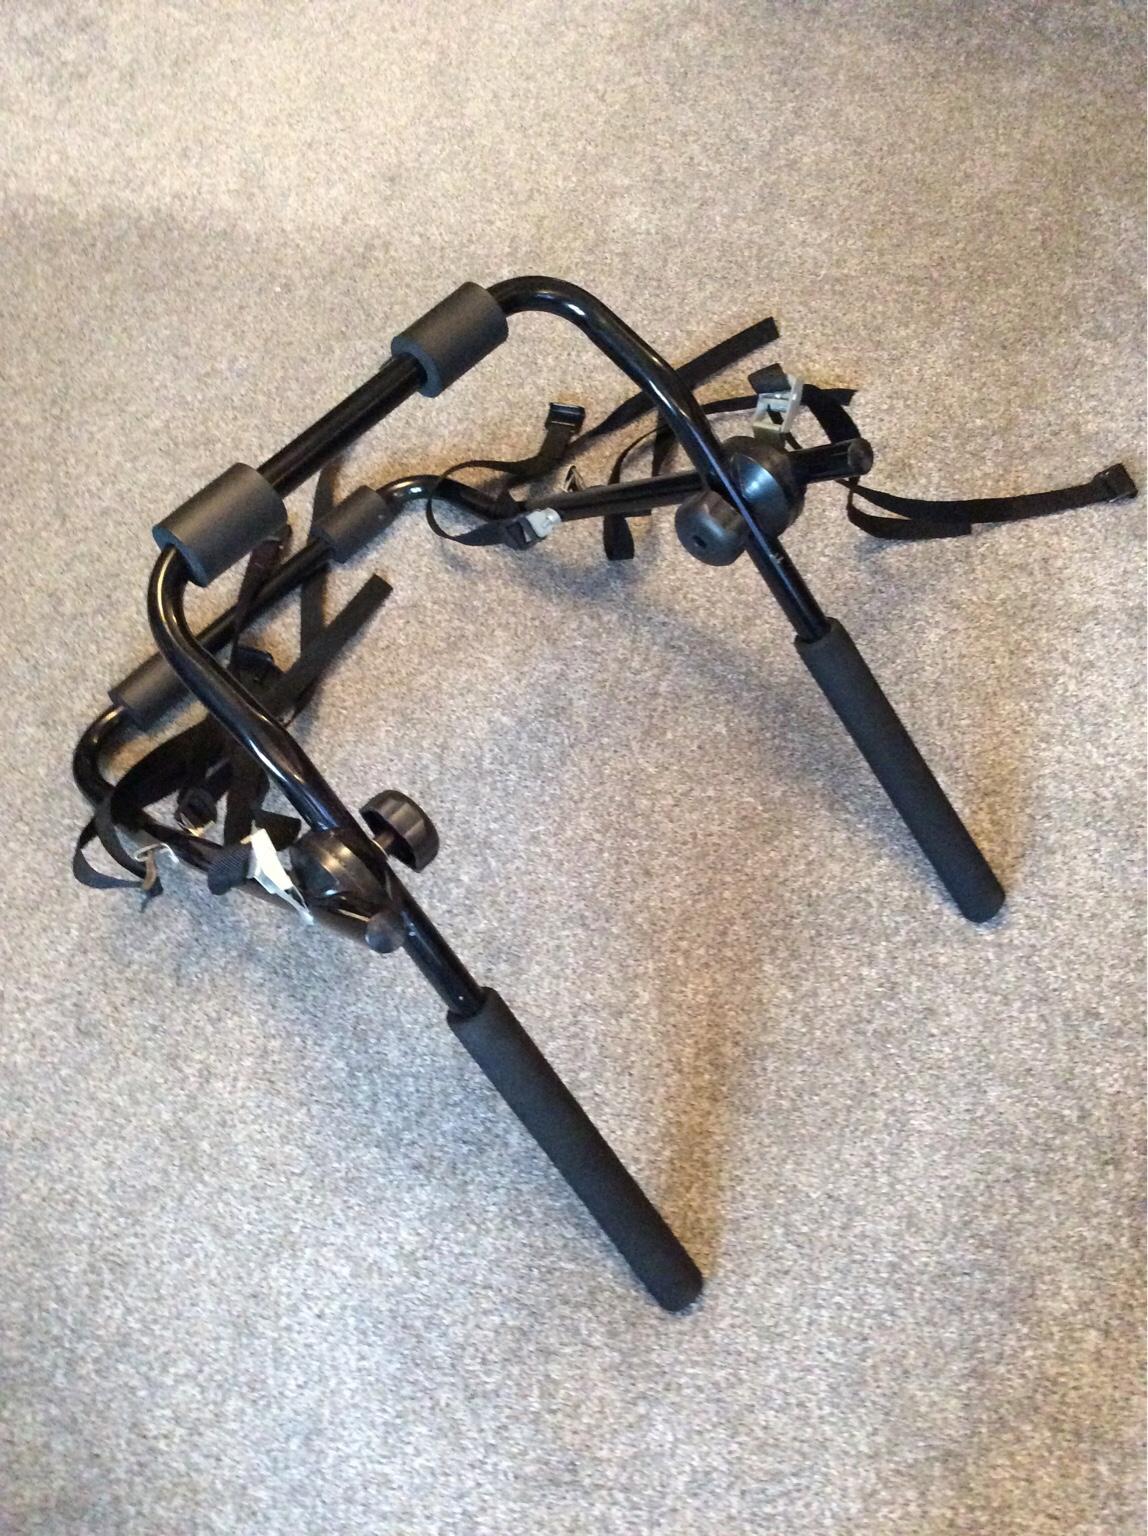 Vauxhall Astra Saloon 3 Cycle Carrier Rear Tailgate Boot Bike Rack